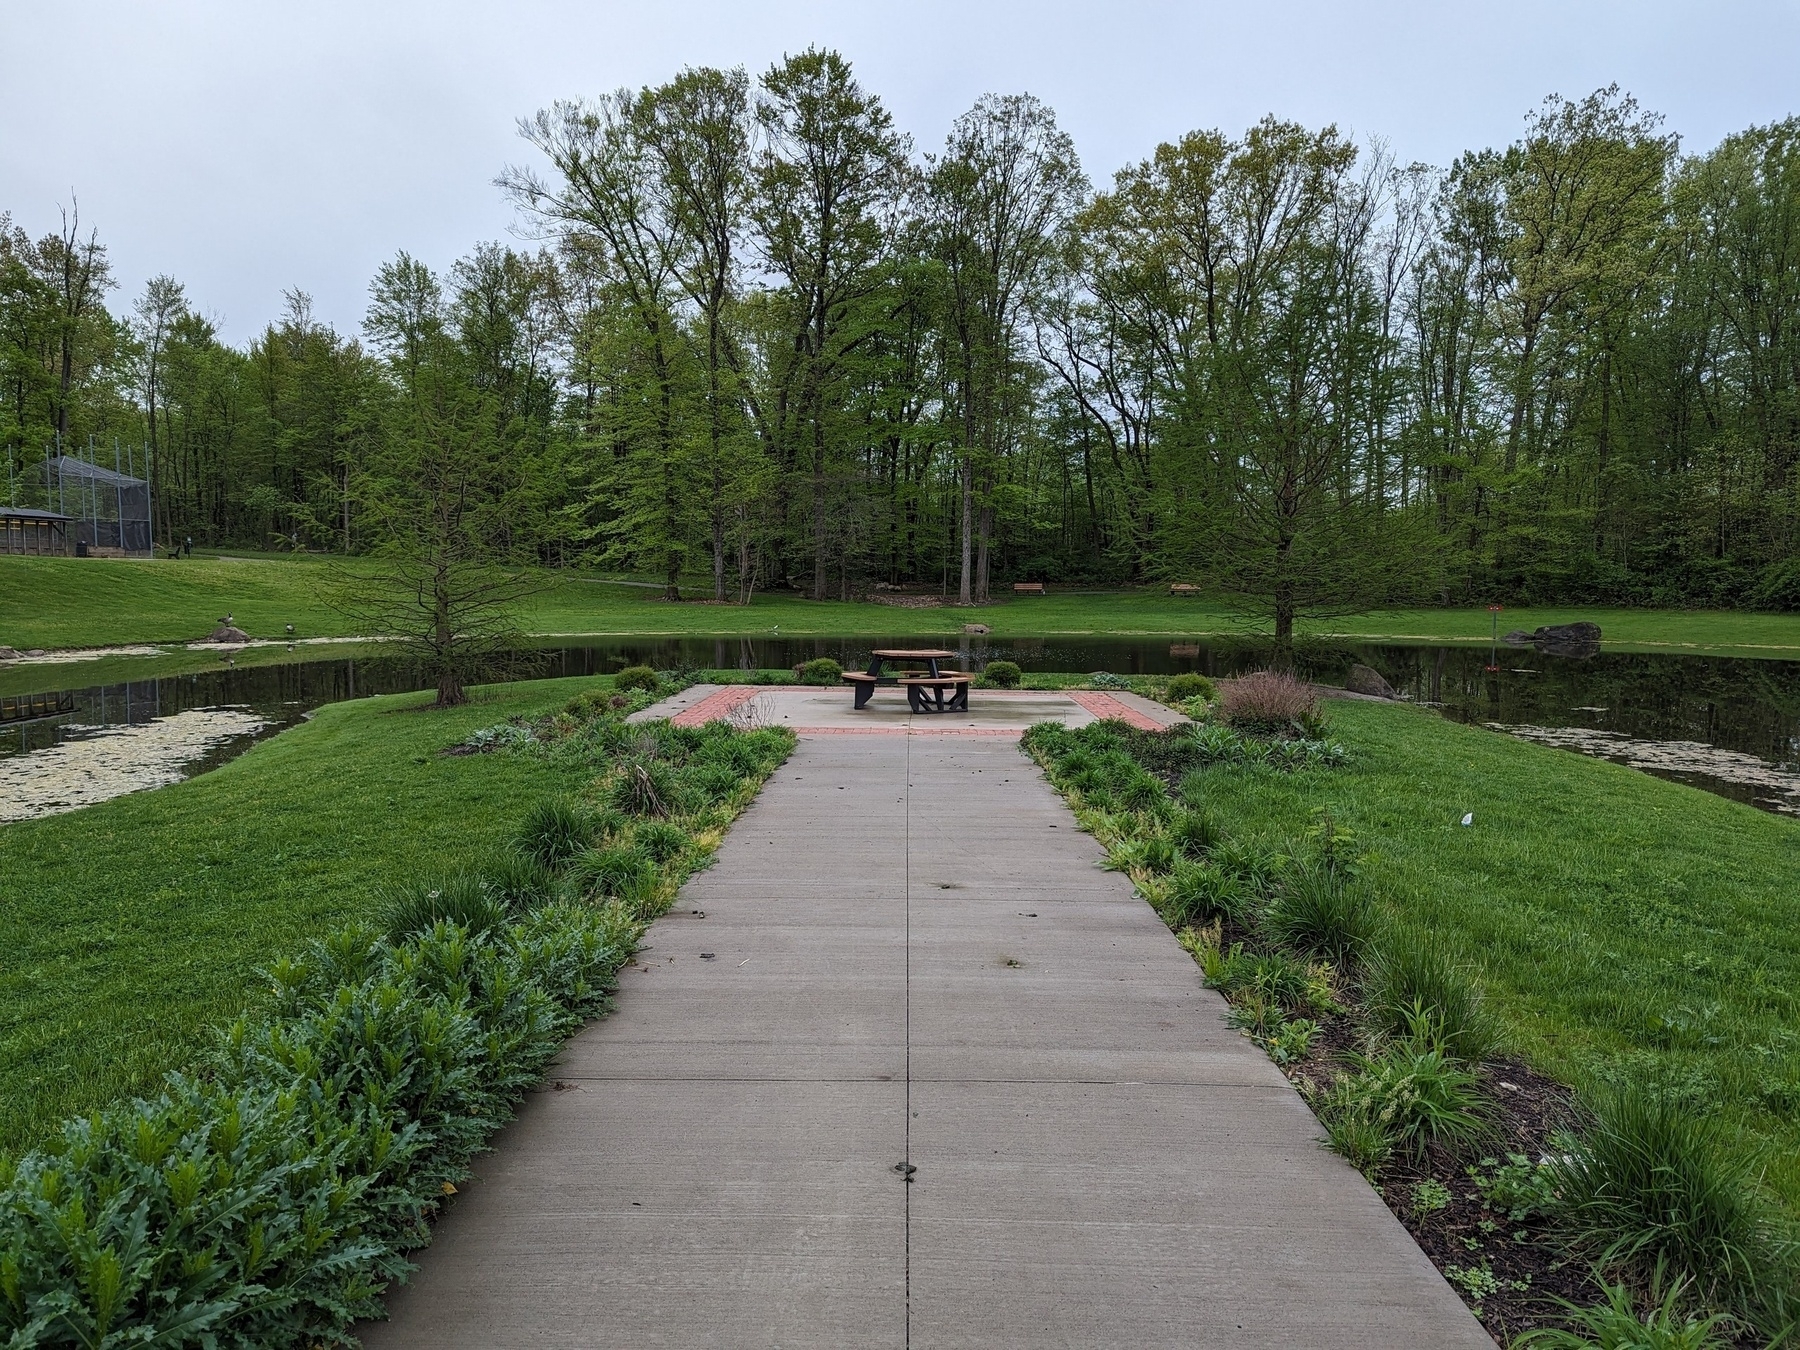 Concrete pathway leading to a picnic table on a peninsula surrounded by water